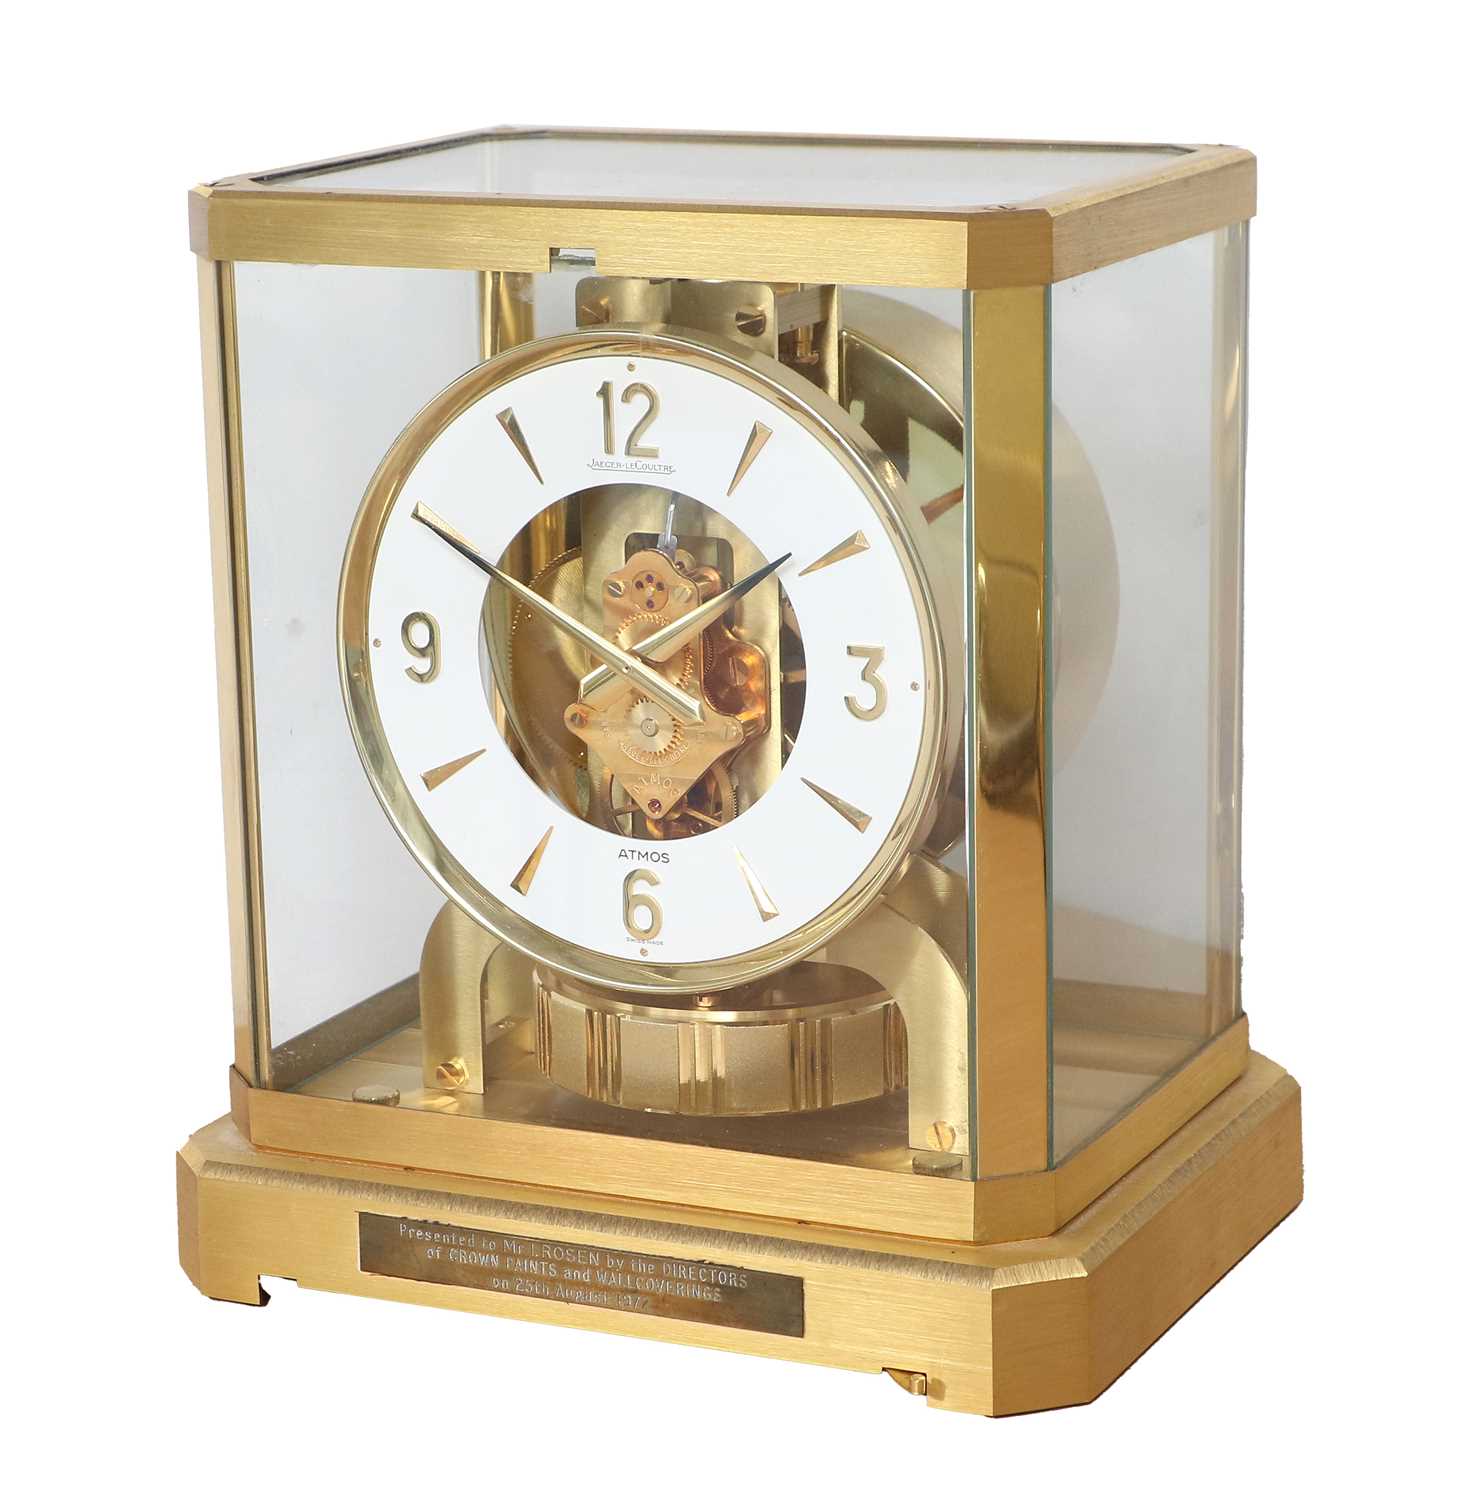 A Brass Atmos Clock, signed Jaeger LeCoultre, 20th Century, case with glass panels, front of the